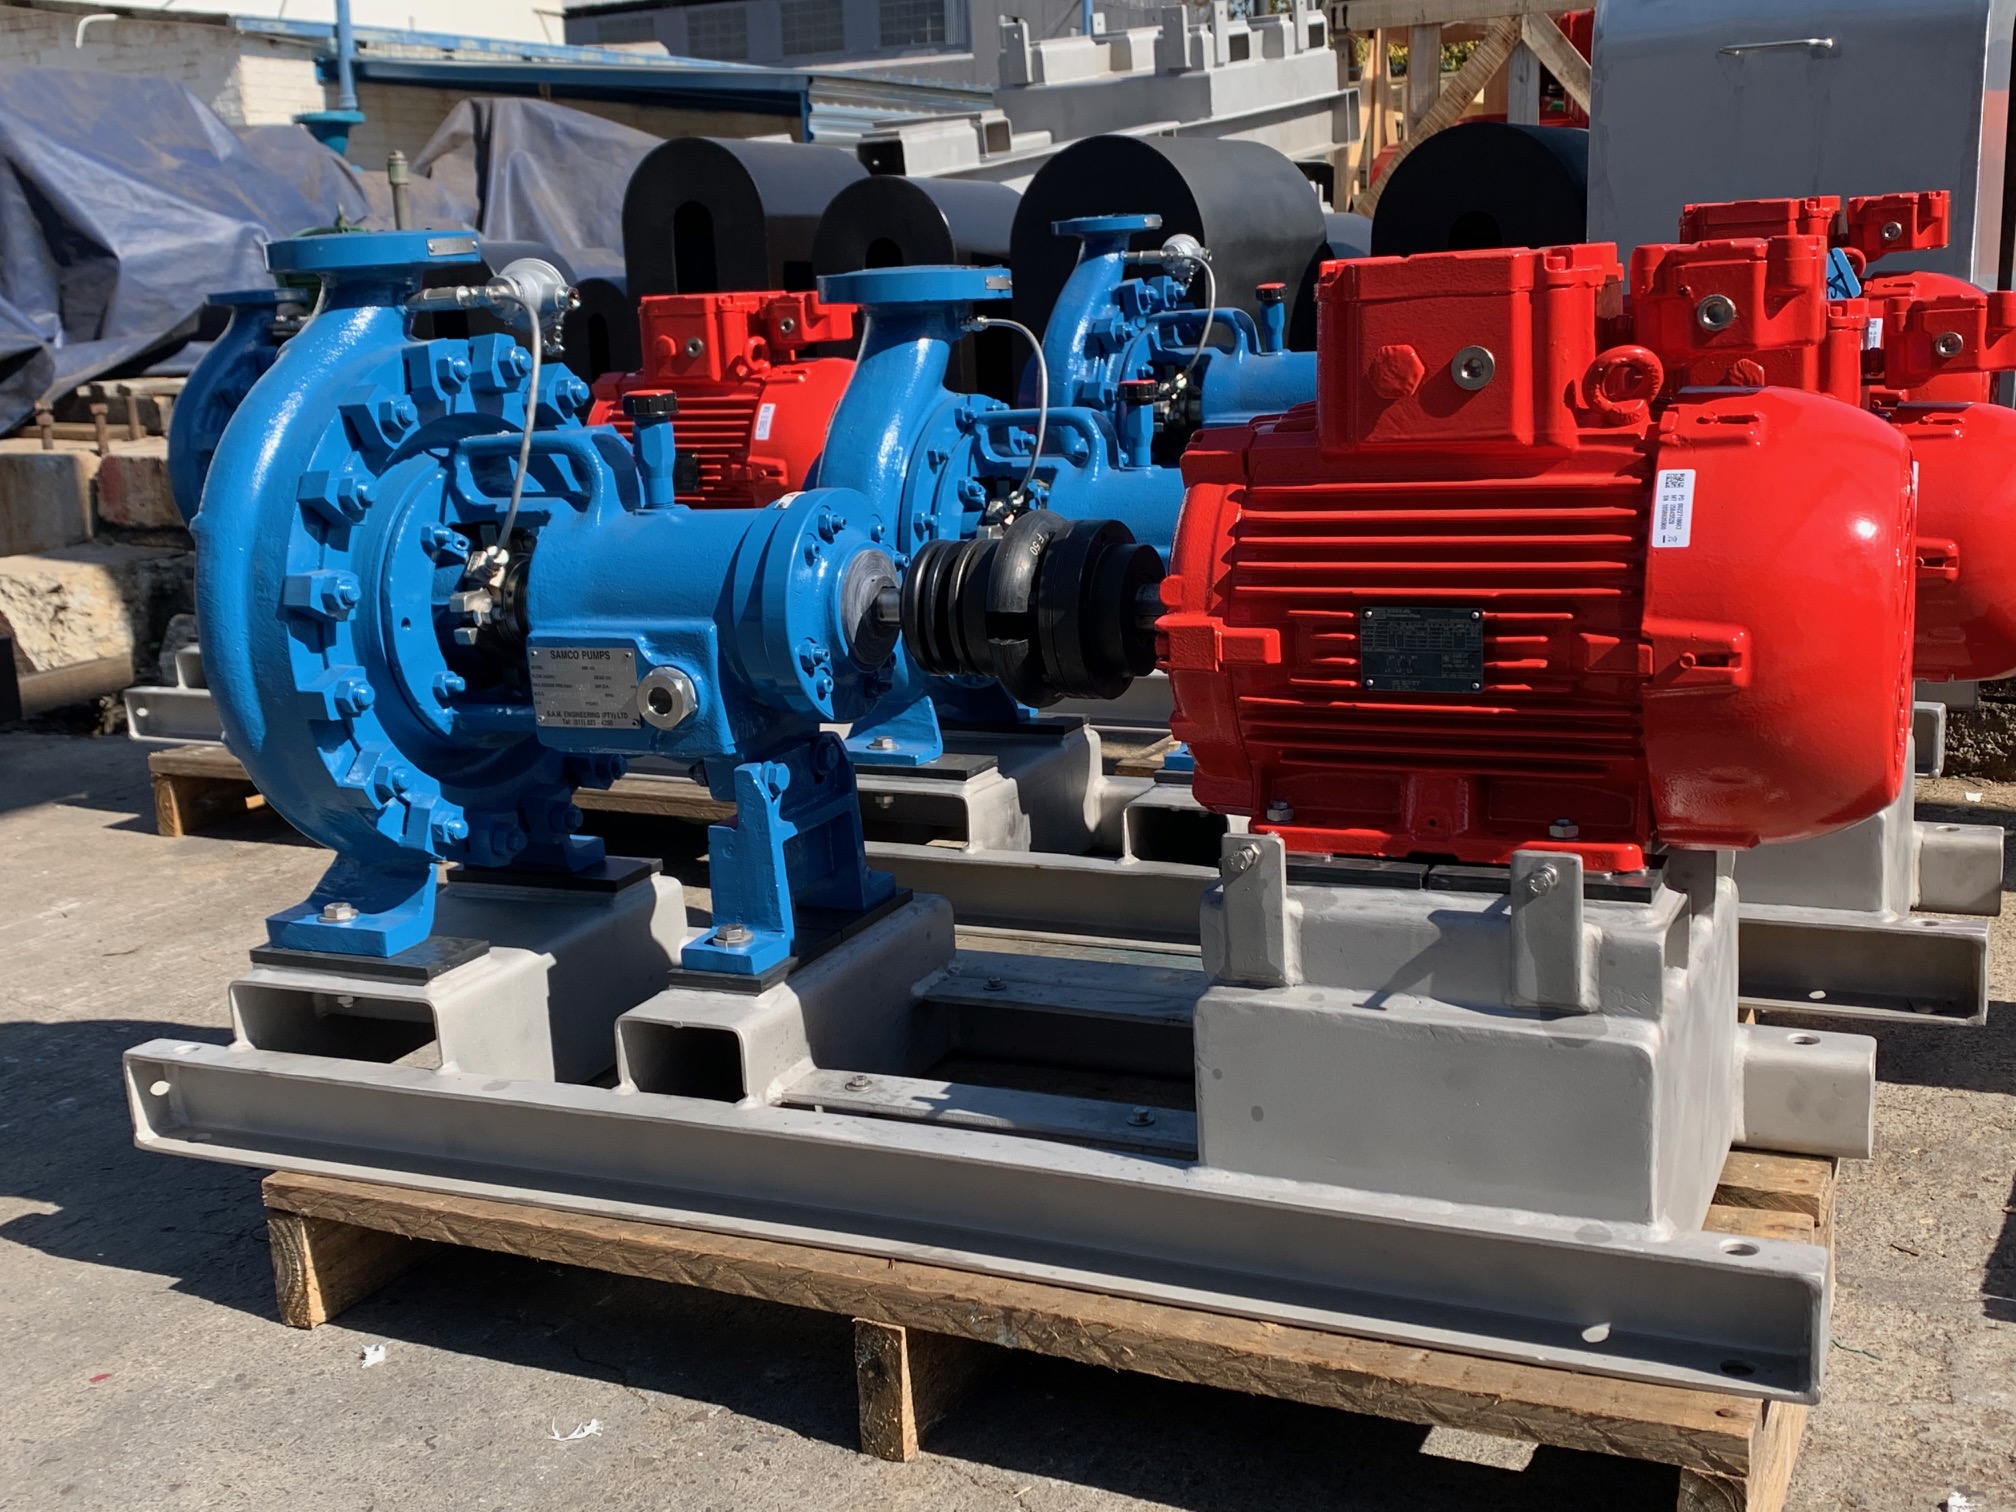 The polymer, Vesconite, has been installed by SAM Engineering on base plates where its centrifugal pumps are mounted.